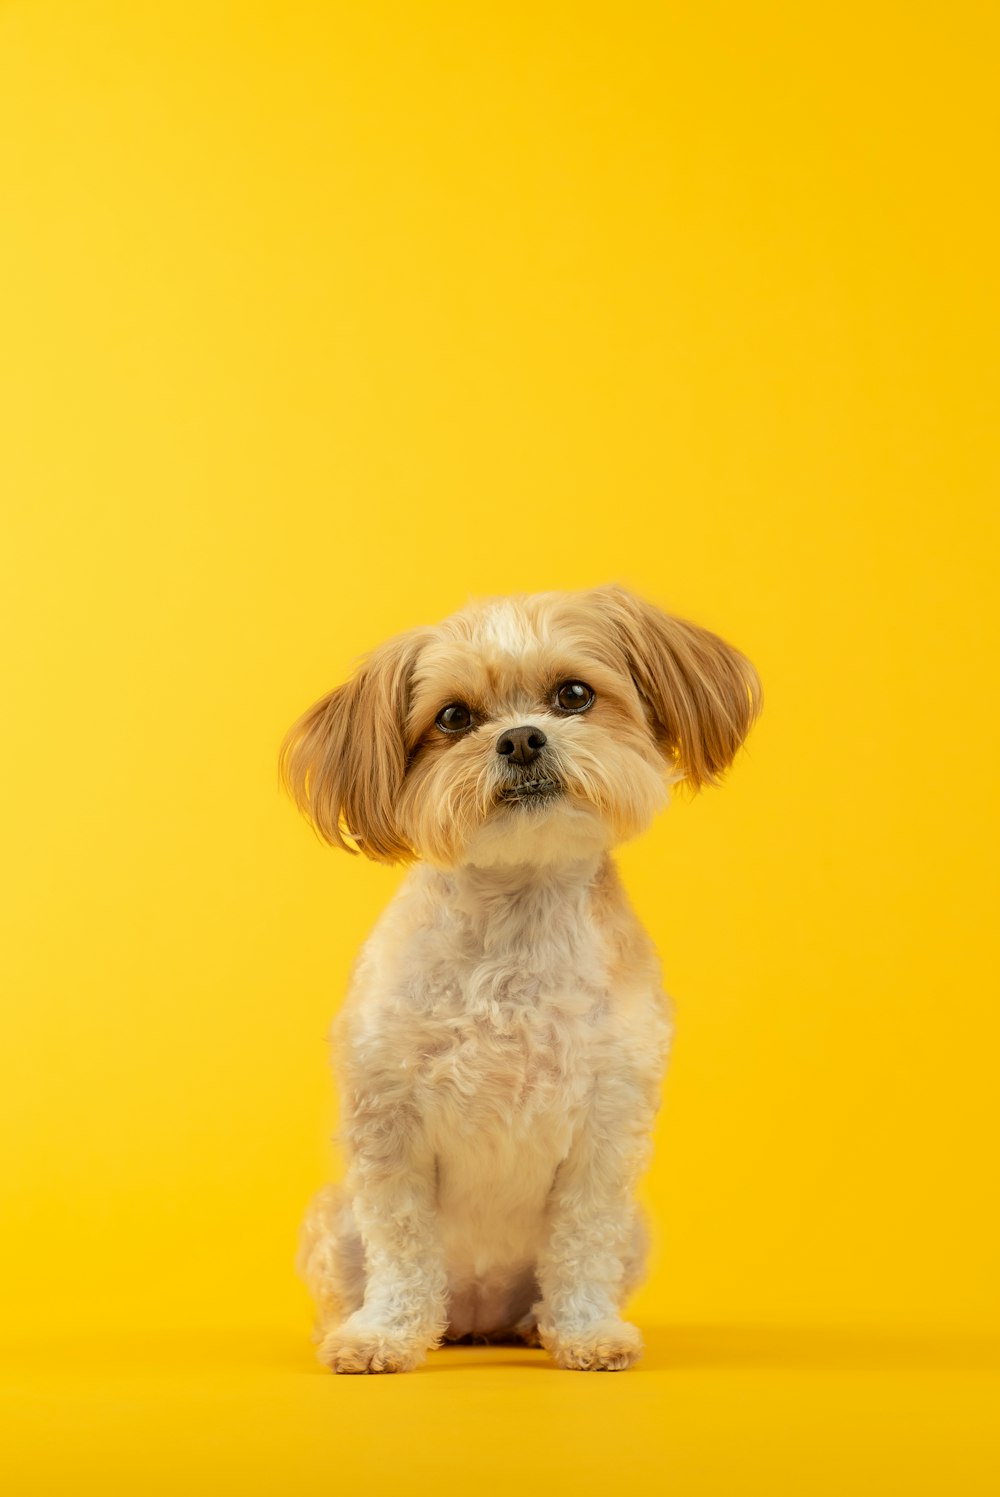 a small white dog sitting on a yellow background